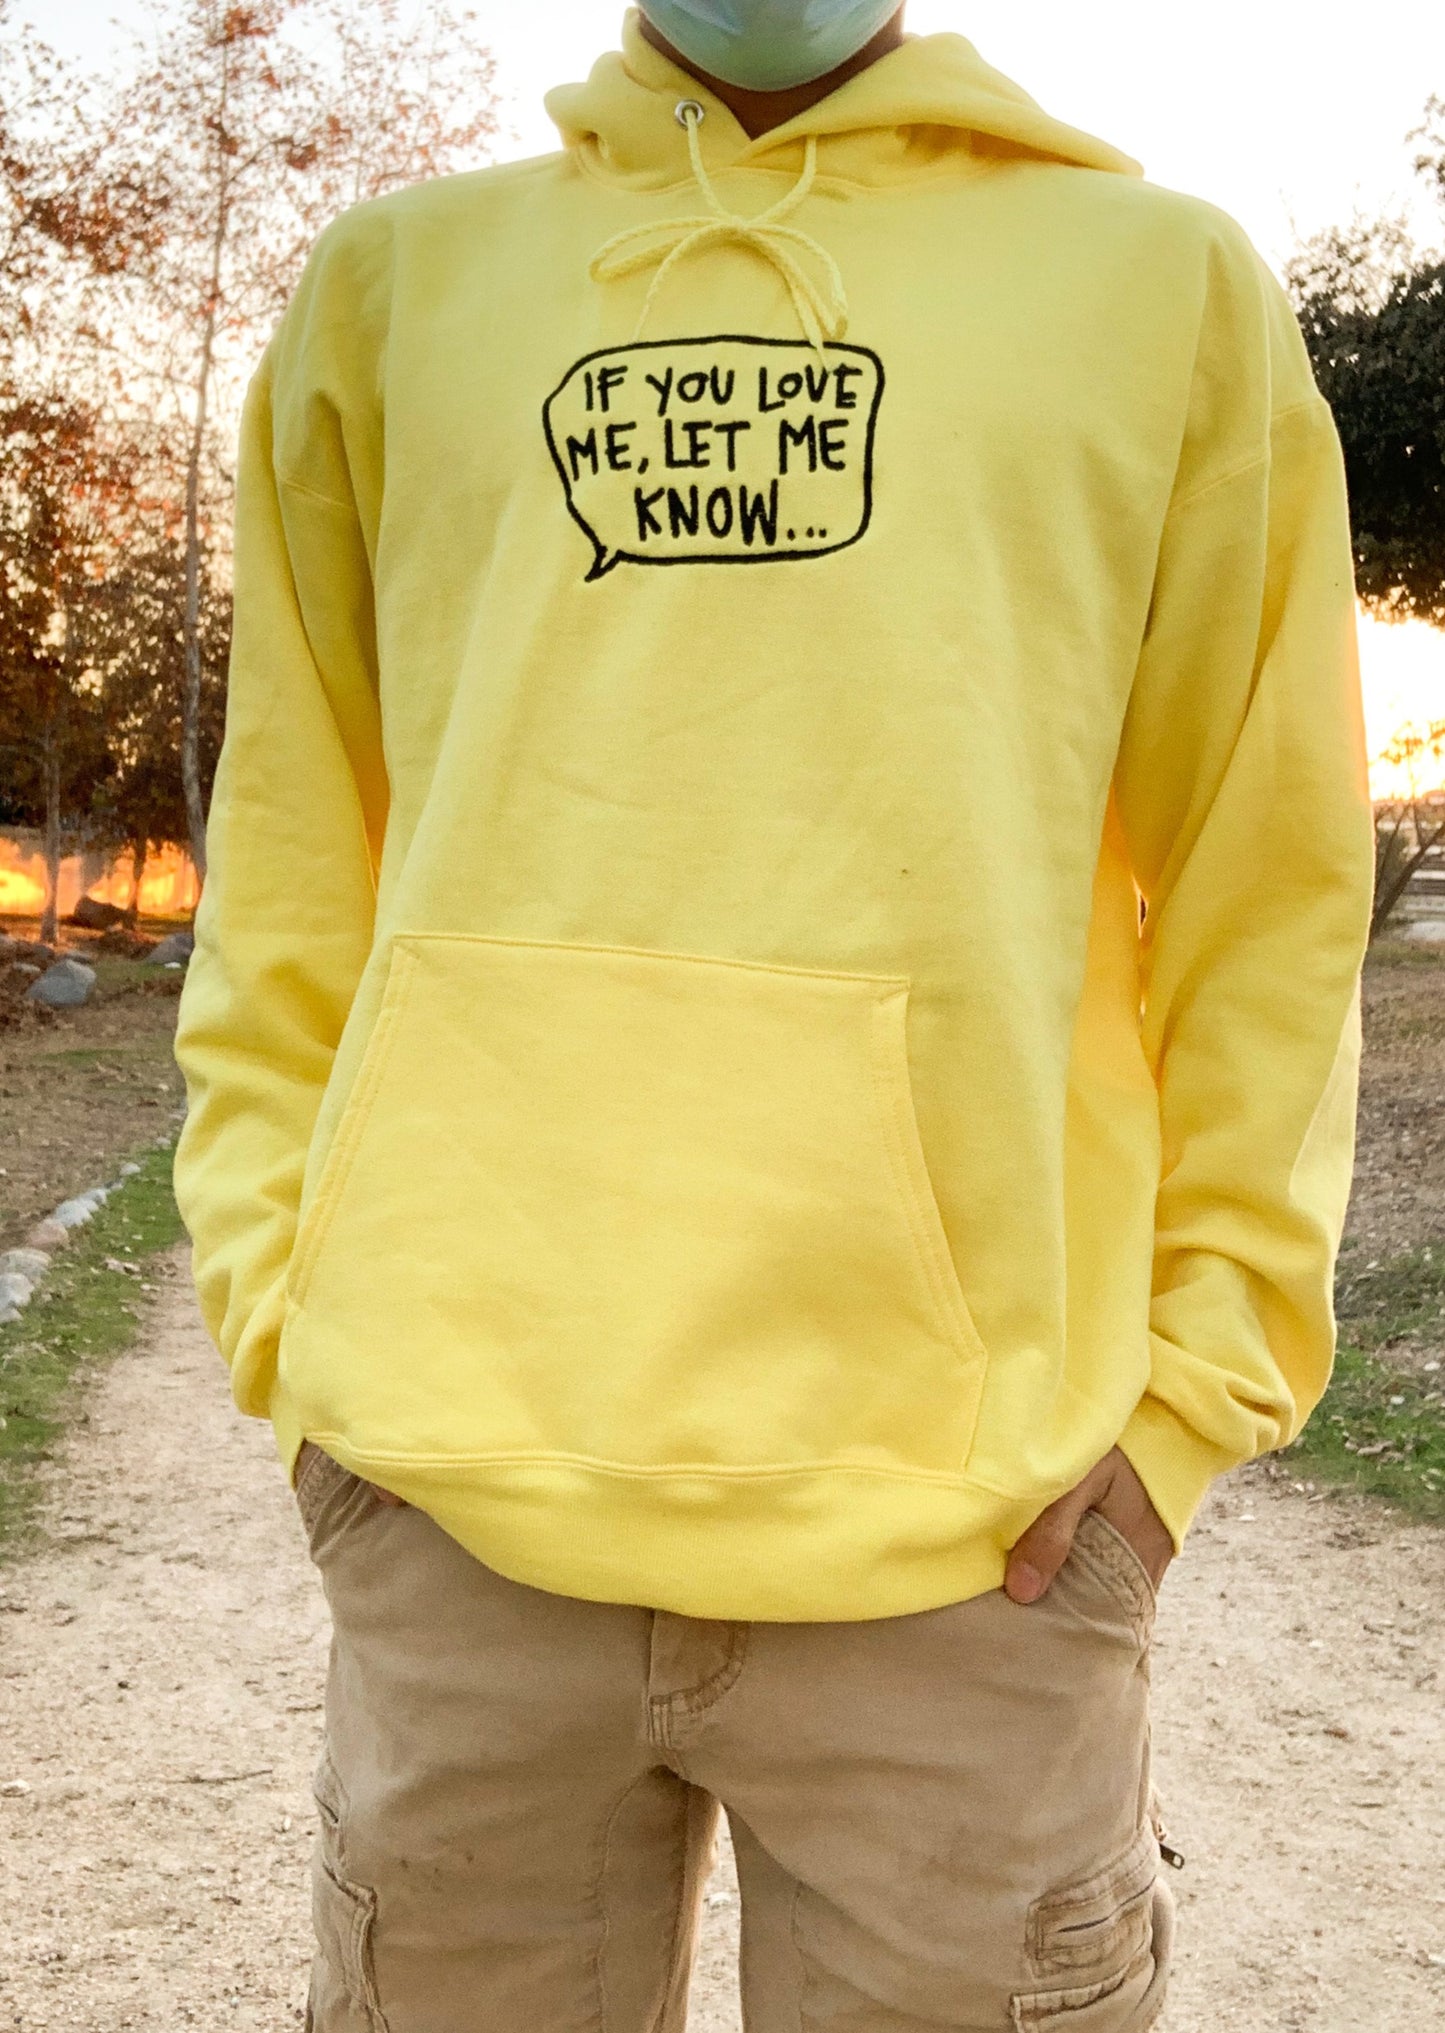 If you love me let me know Embroidered Yellow Hoodie